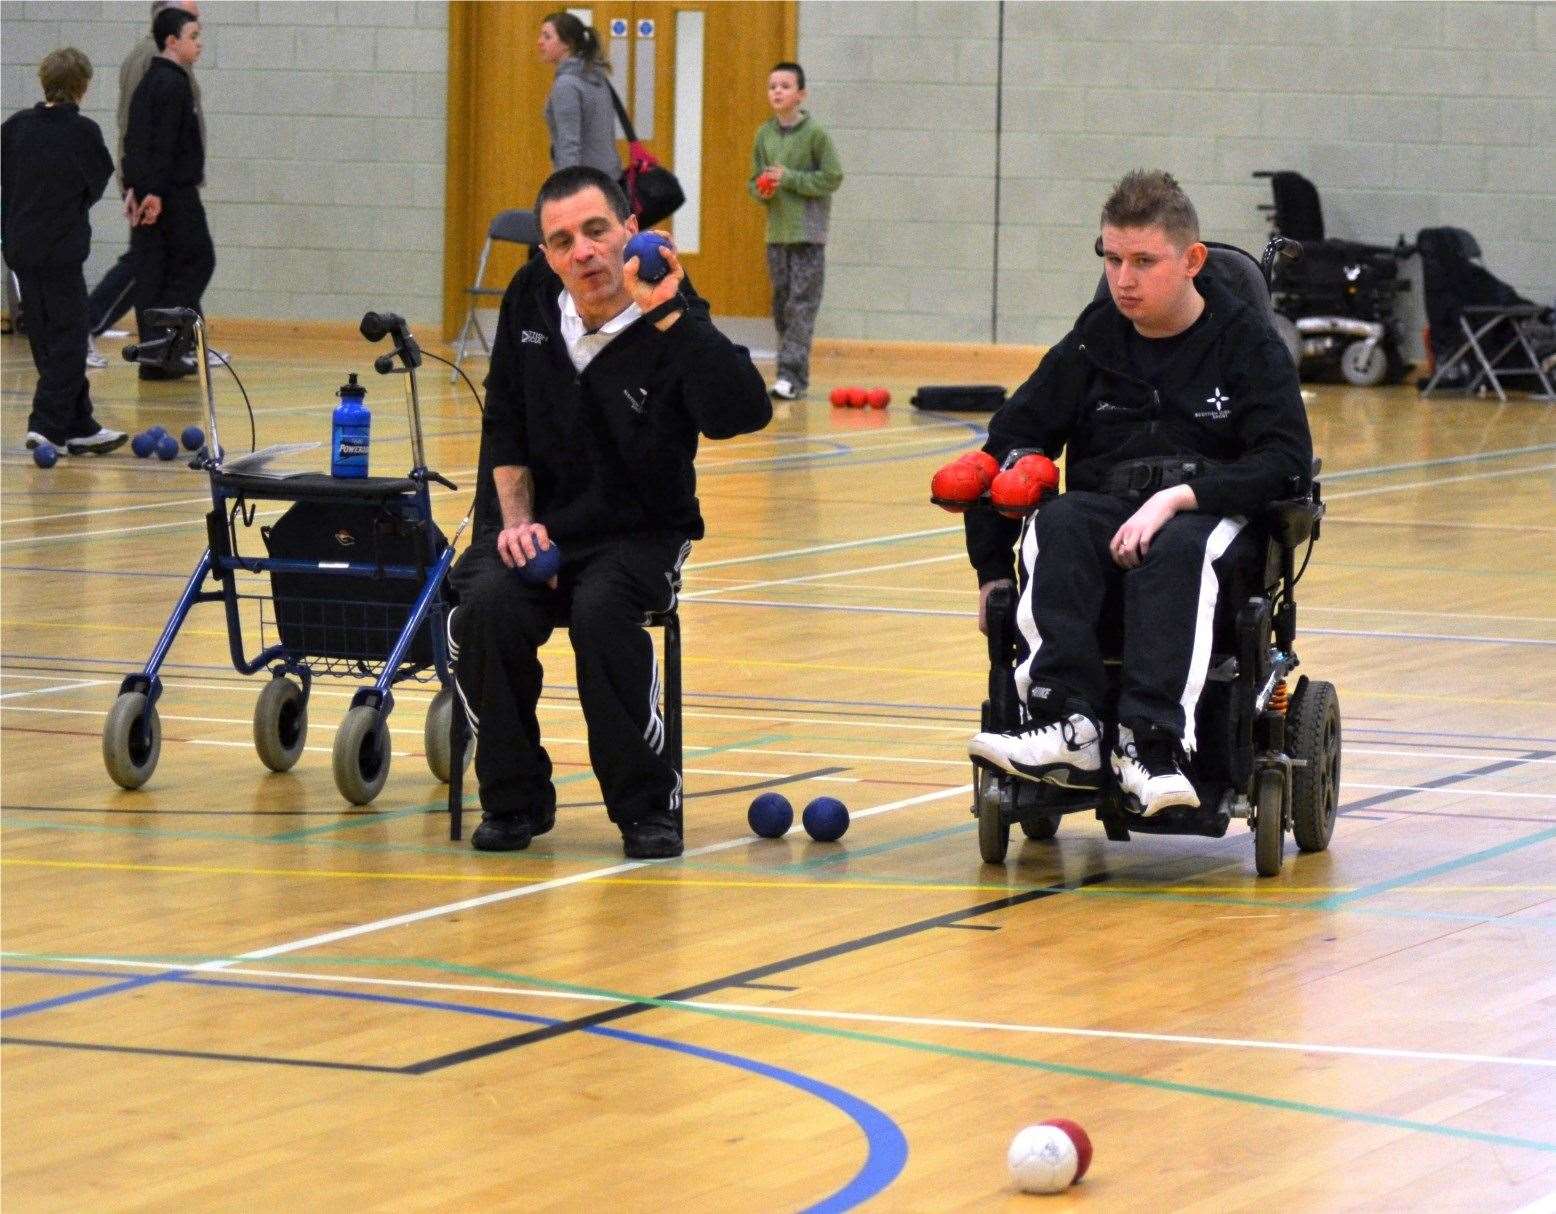 Highlife Highland is offering a try-out of the Paralympic sport Boccia